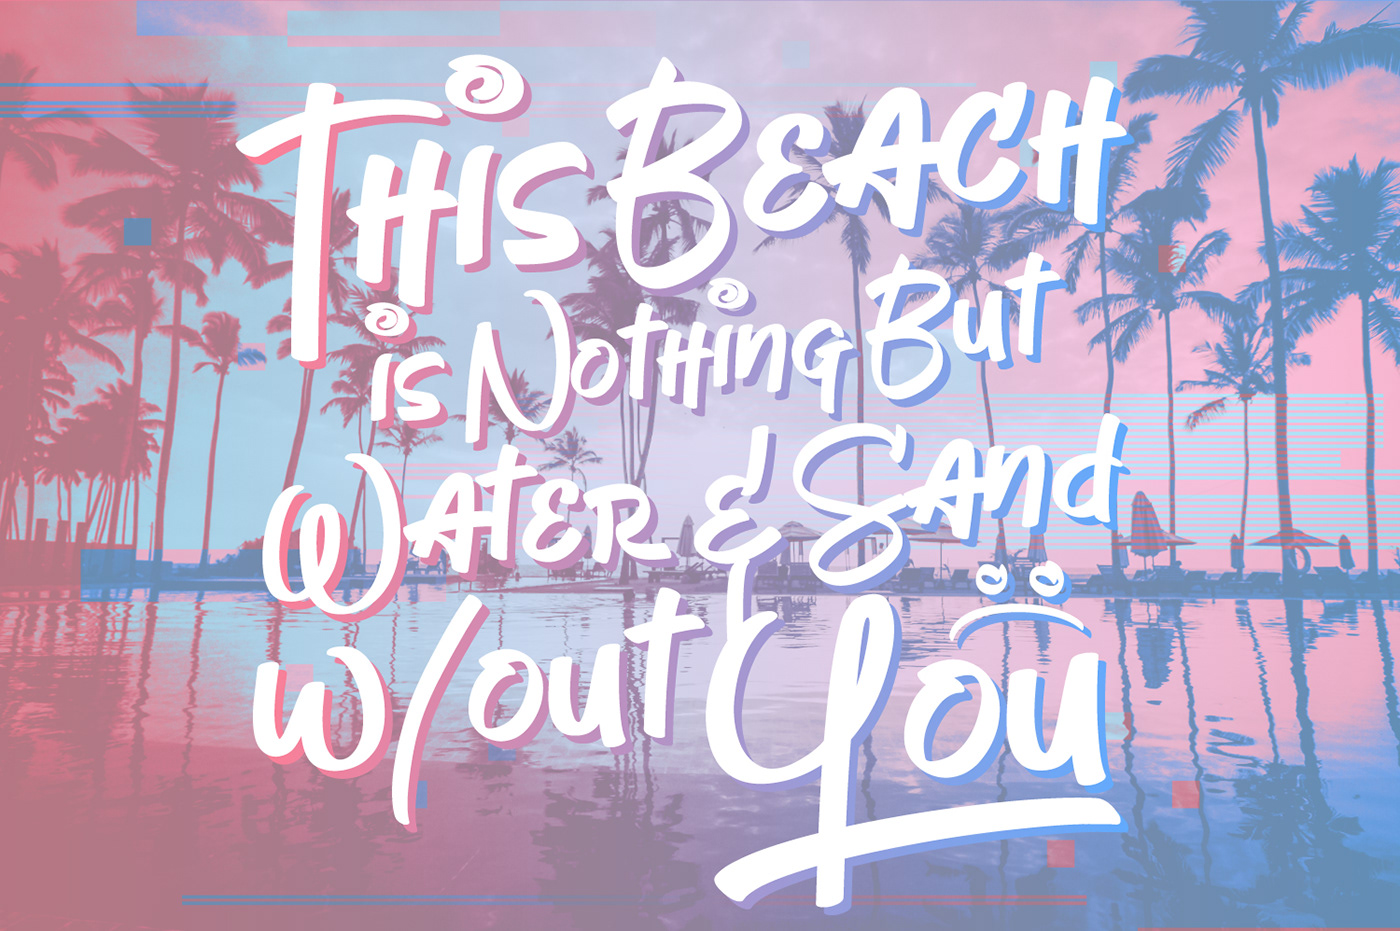 font Typeface Script Handwiting Display type free hip summer beach vacation lettering Urban Street Hipster